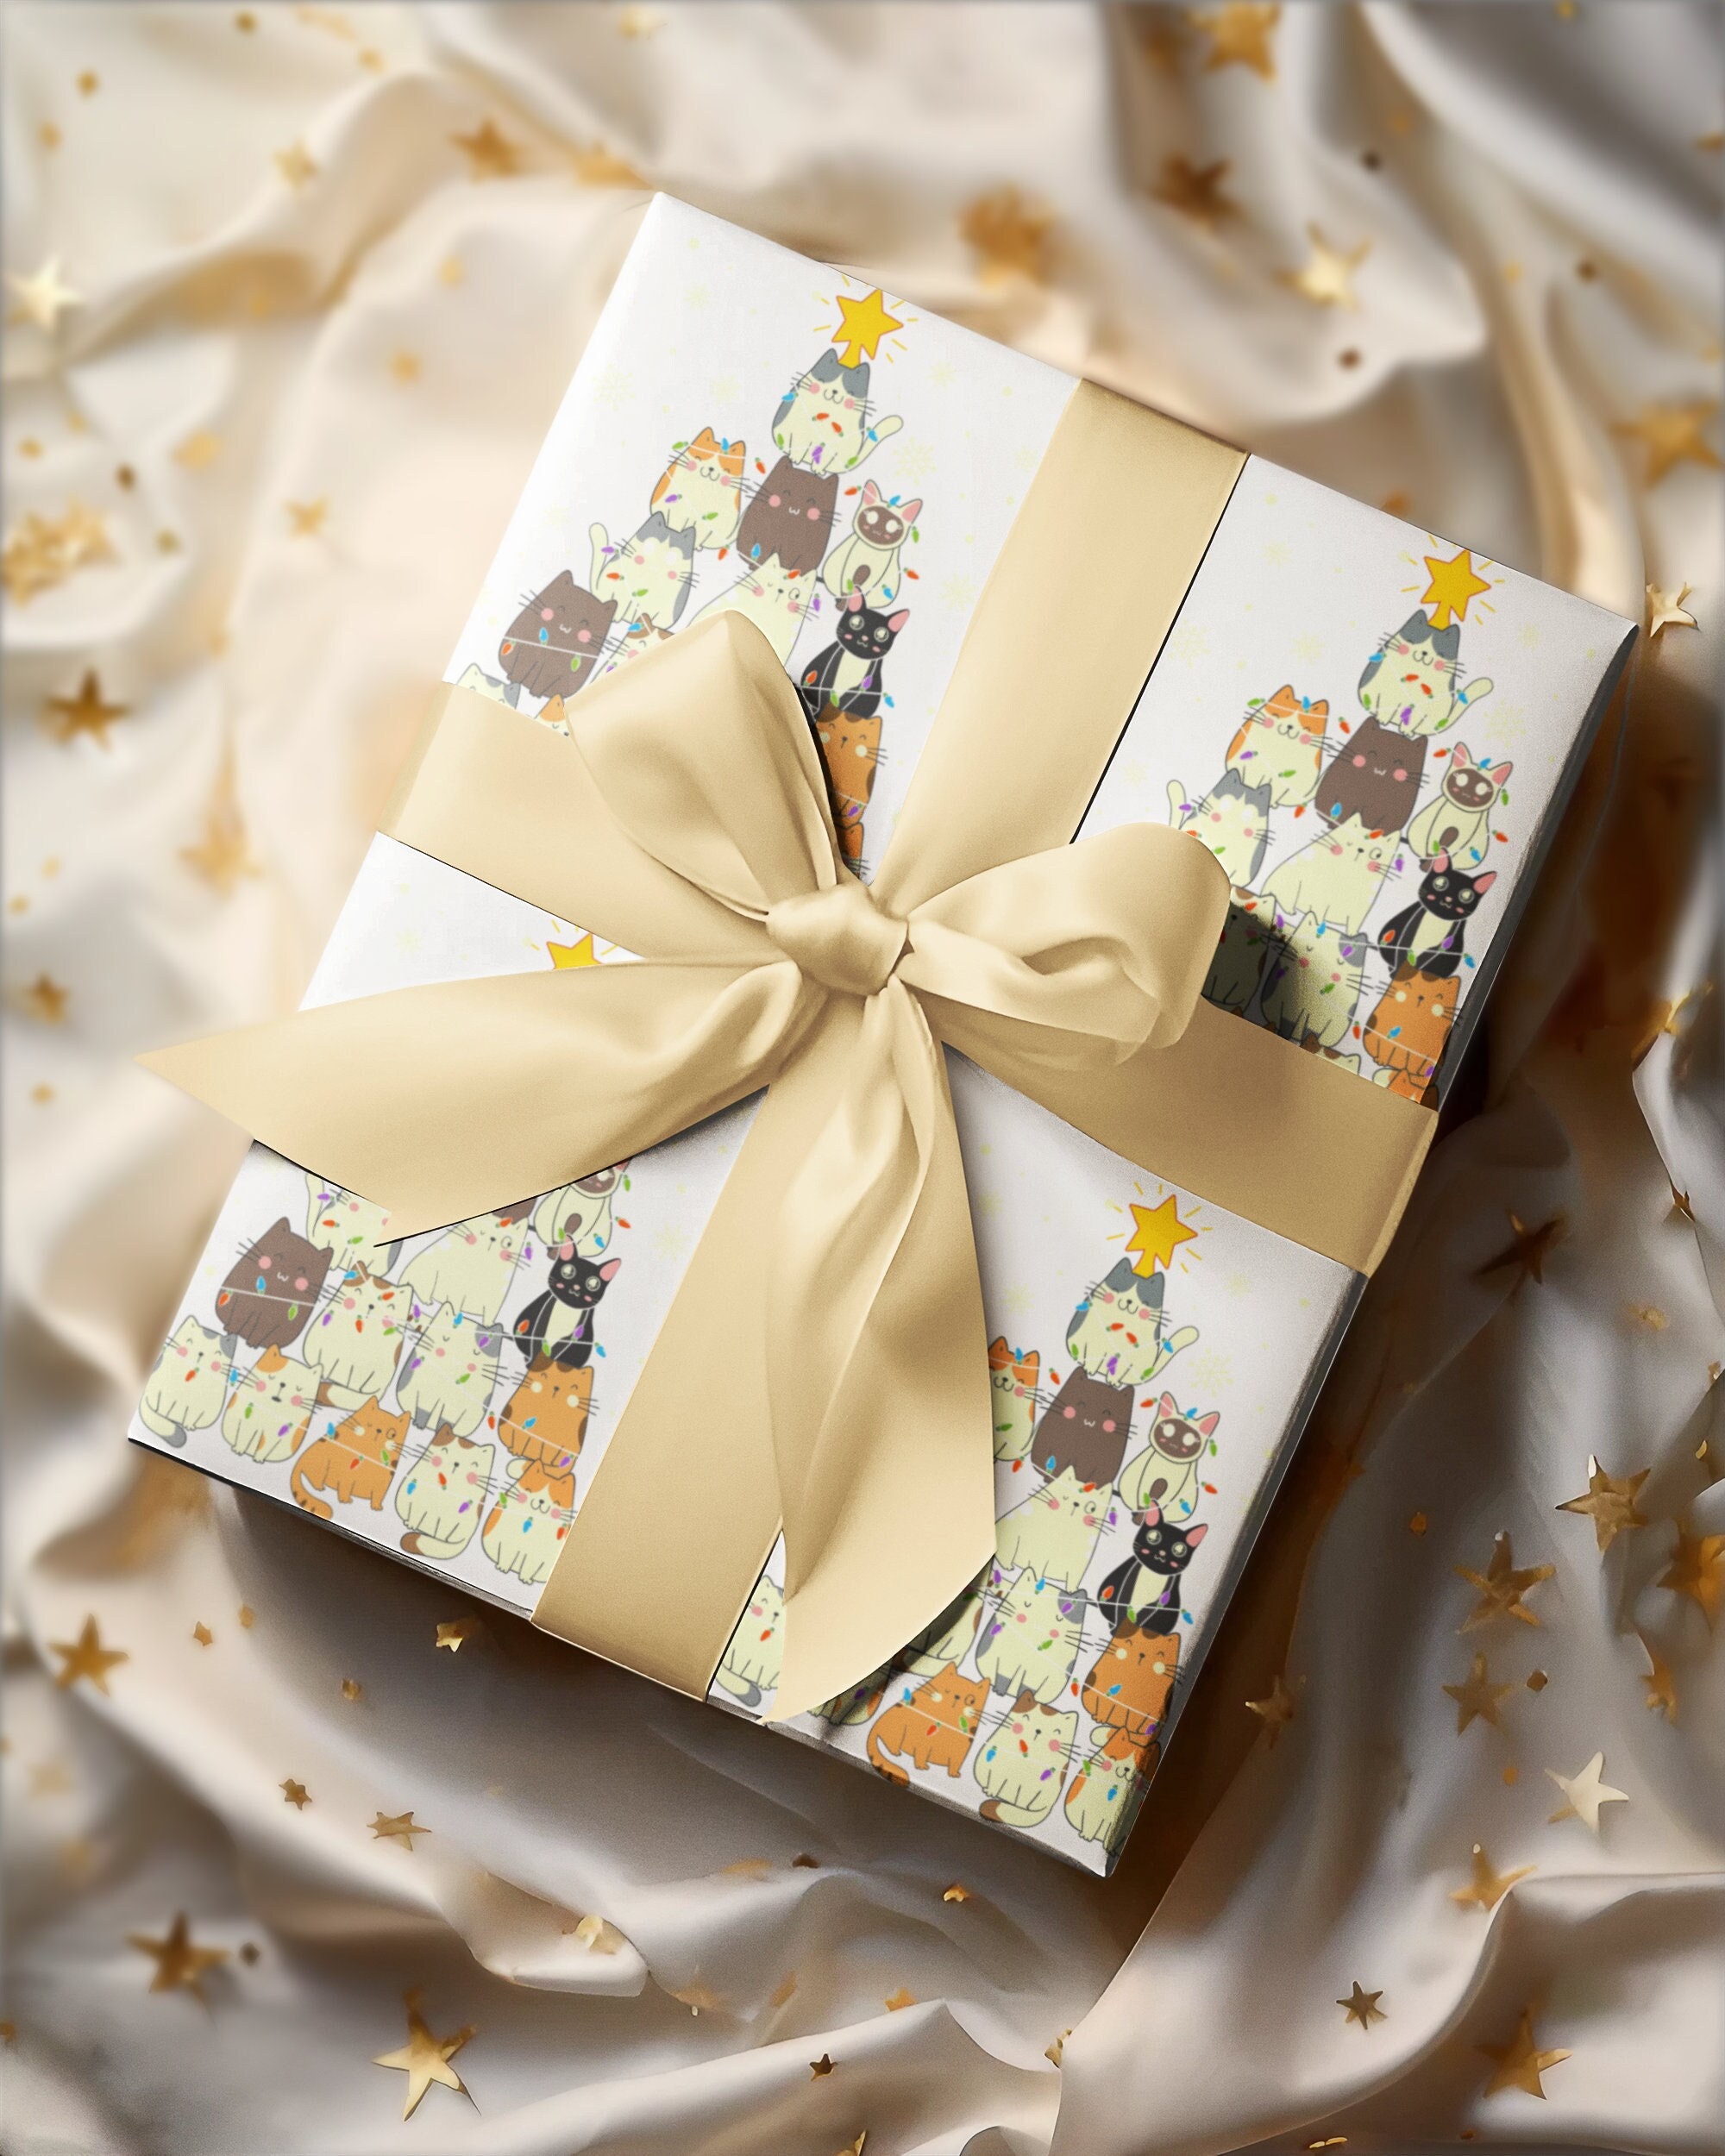 Personalized North Pole Christmas Wrapping Paper/santa's Gift Wrap